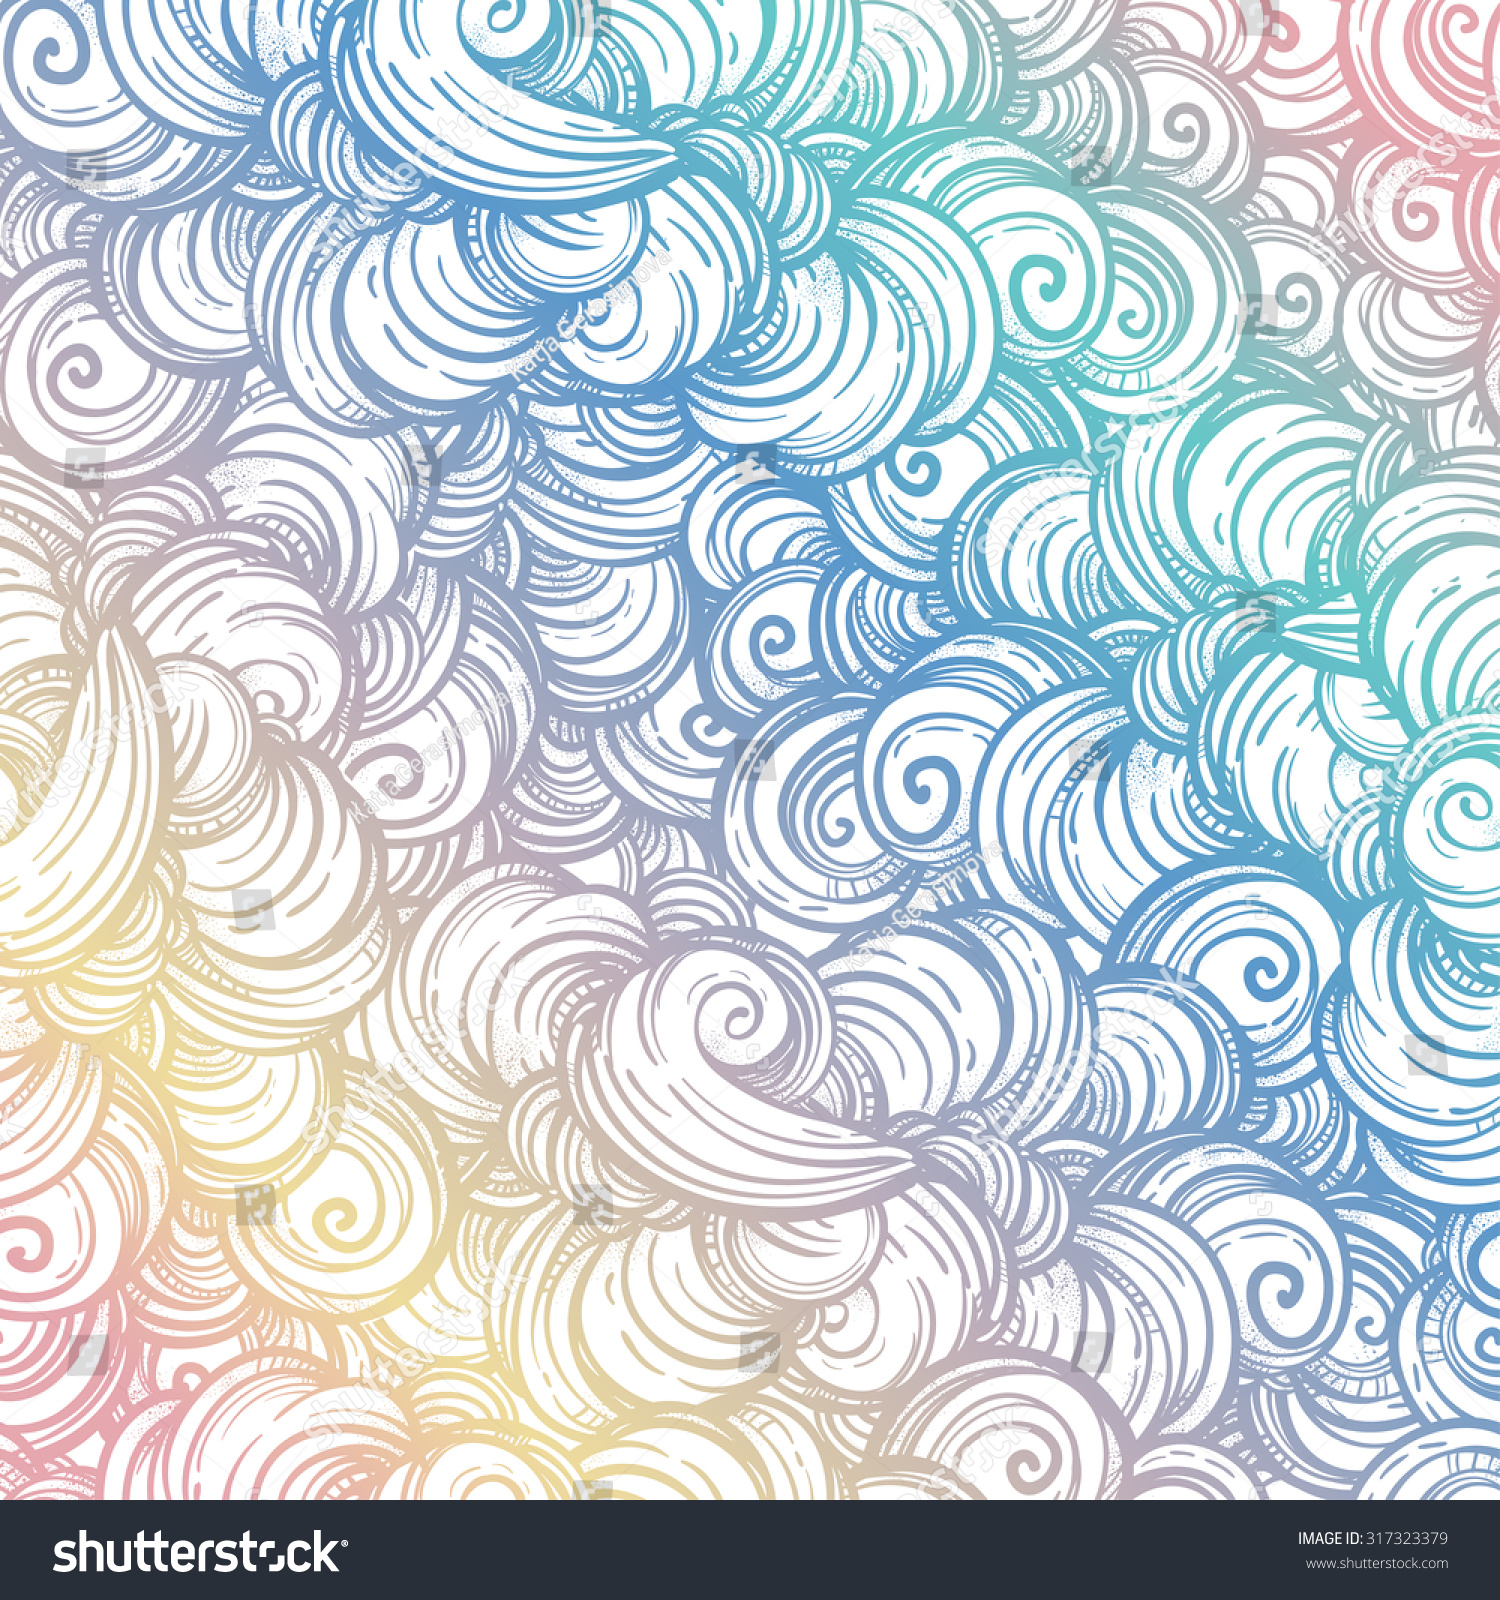 Cute Abstract Vector Background Wallpaper Hand